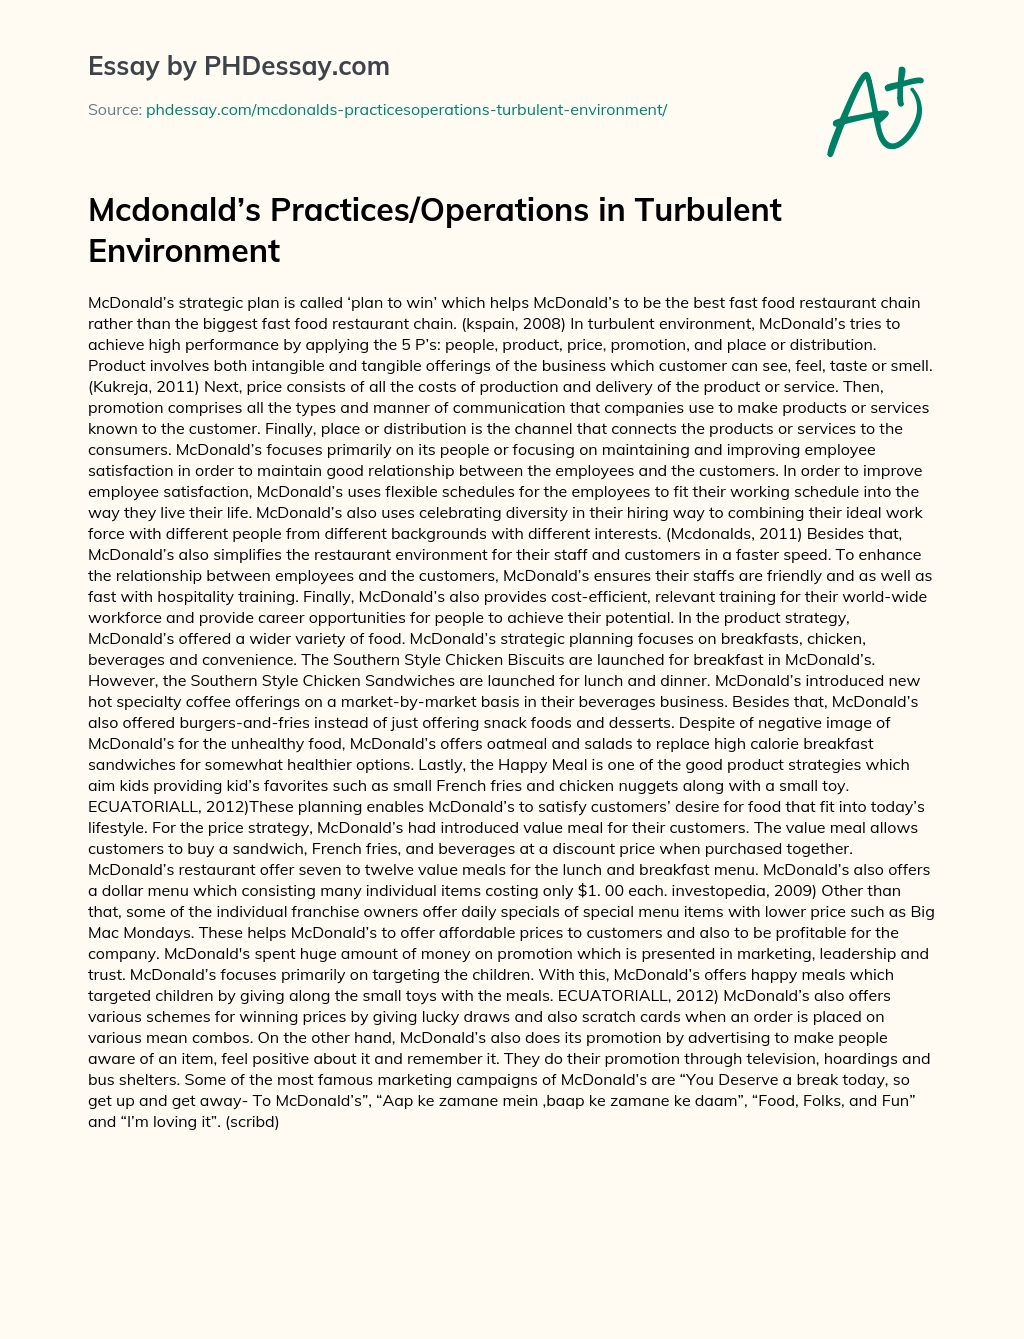 Mcdonald’s Practices/Operations in Turbulent Environment essay